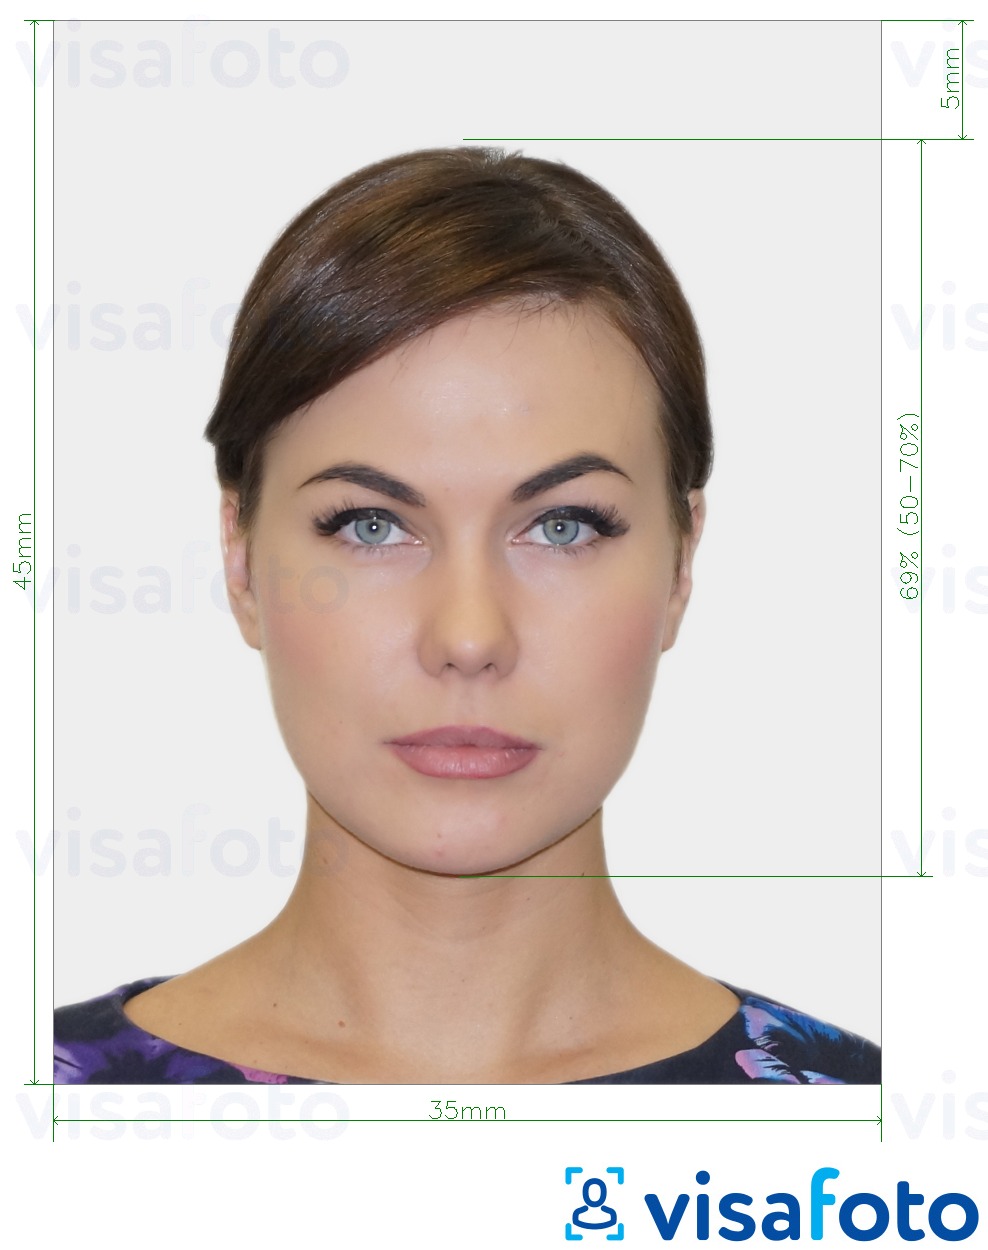 Example of photo for Georgia passport 35x45 mm (3.5x4.5 cm) with exact size specification